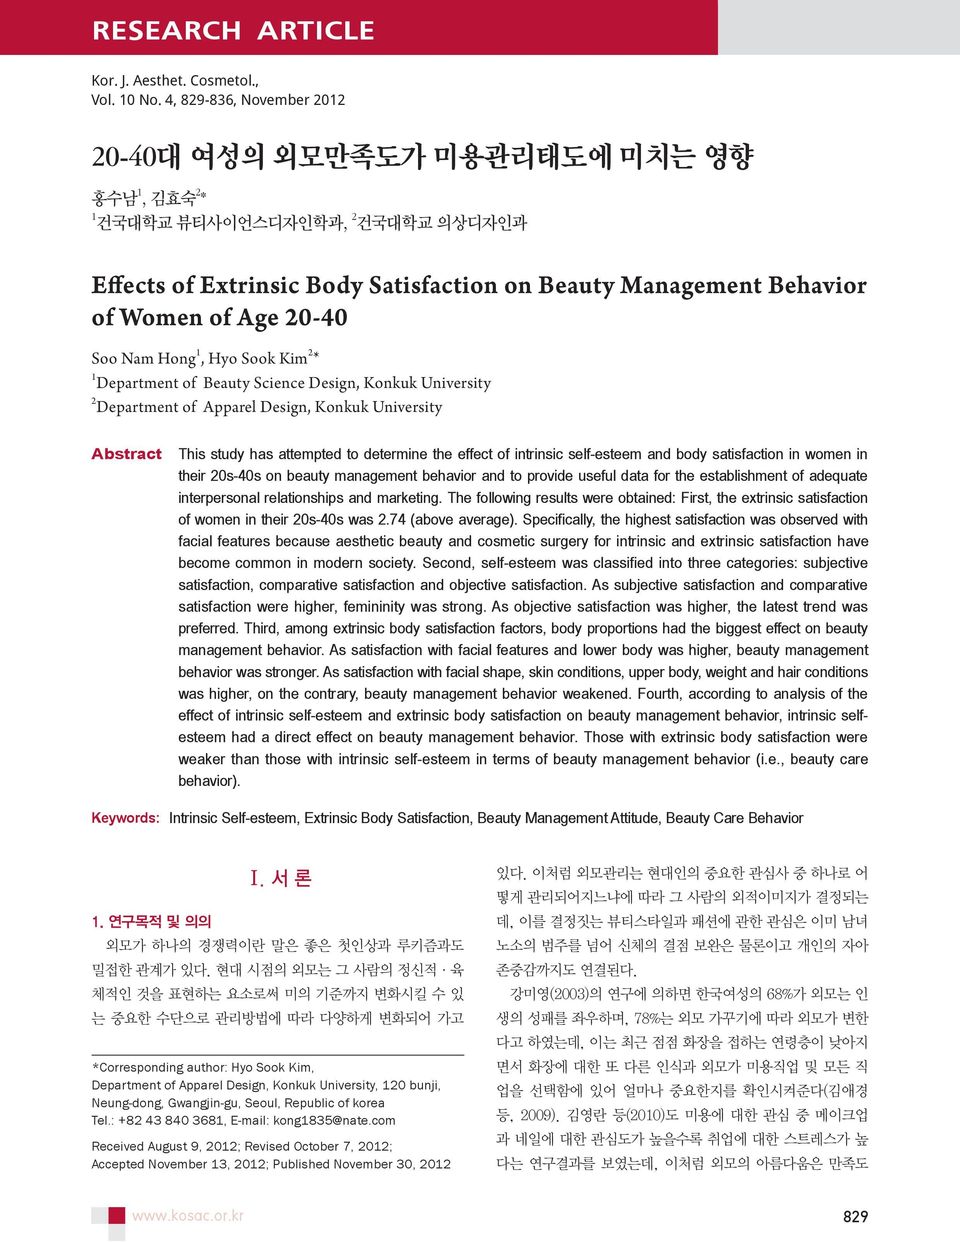 Sook Kim 2 * 1 Department of Beauty Science Design, Konkuk University 2 Department of Apparel Design, Konkuk University Abstract This study has attempted to determine the effect of intrinsic